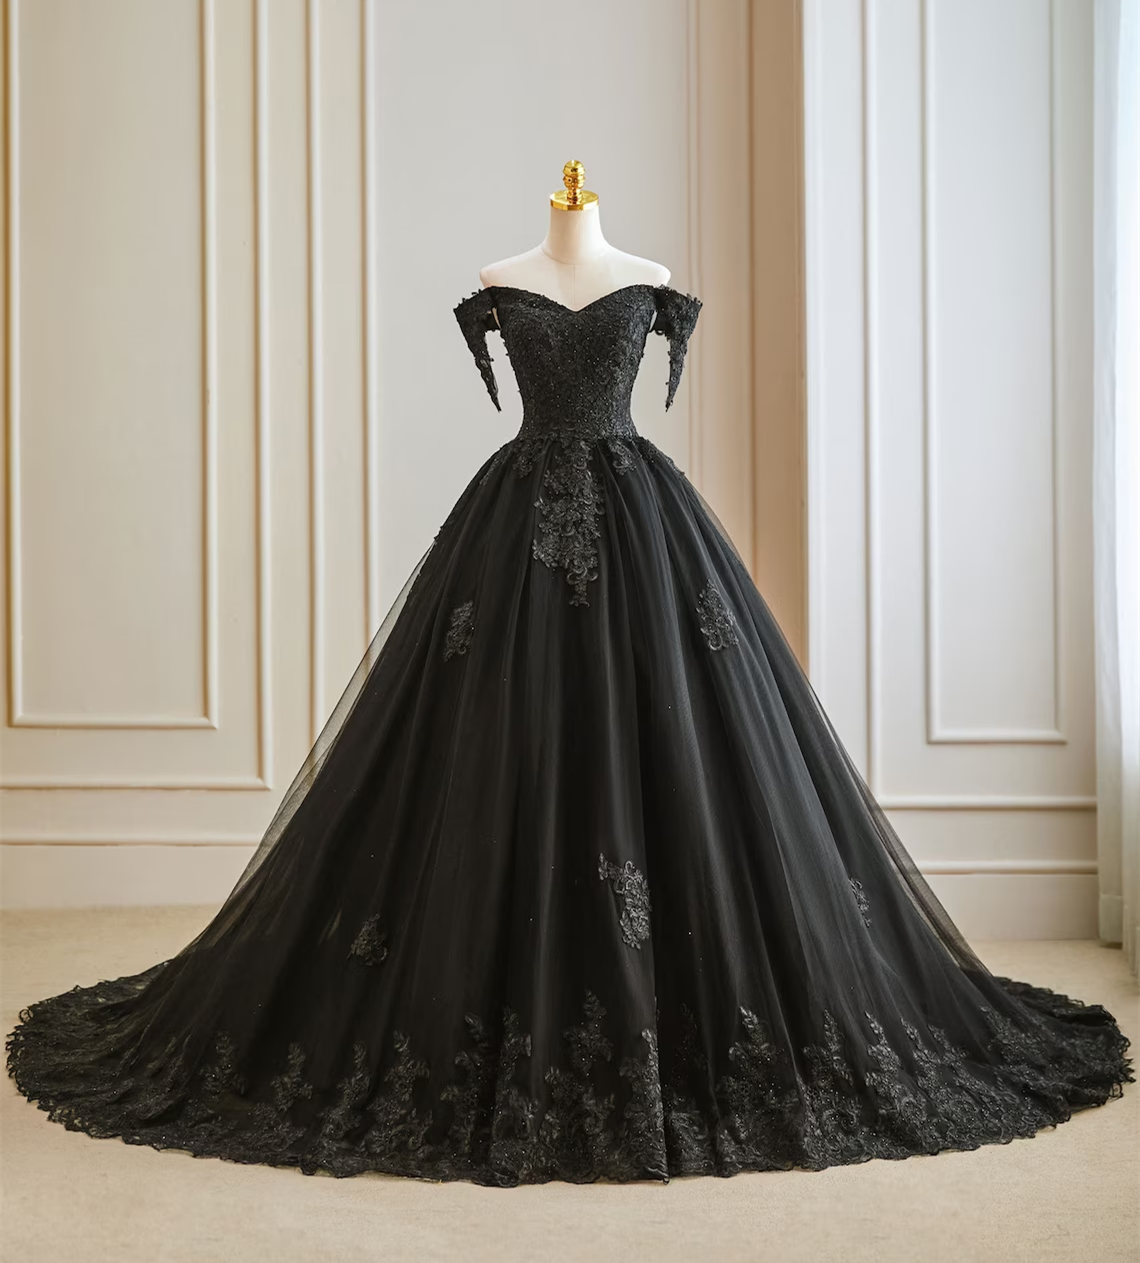 Off The Shoulder Black Gothic Ball Gown Wedding Dress on Luulla